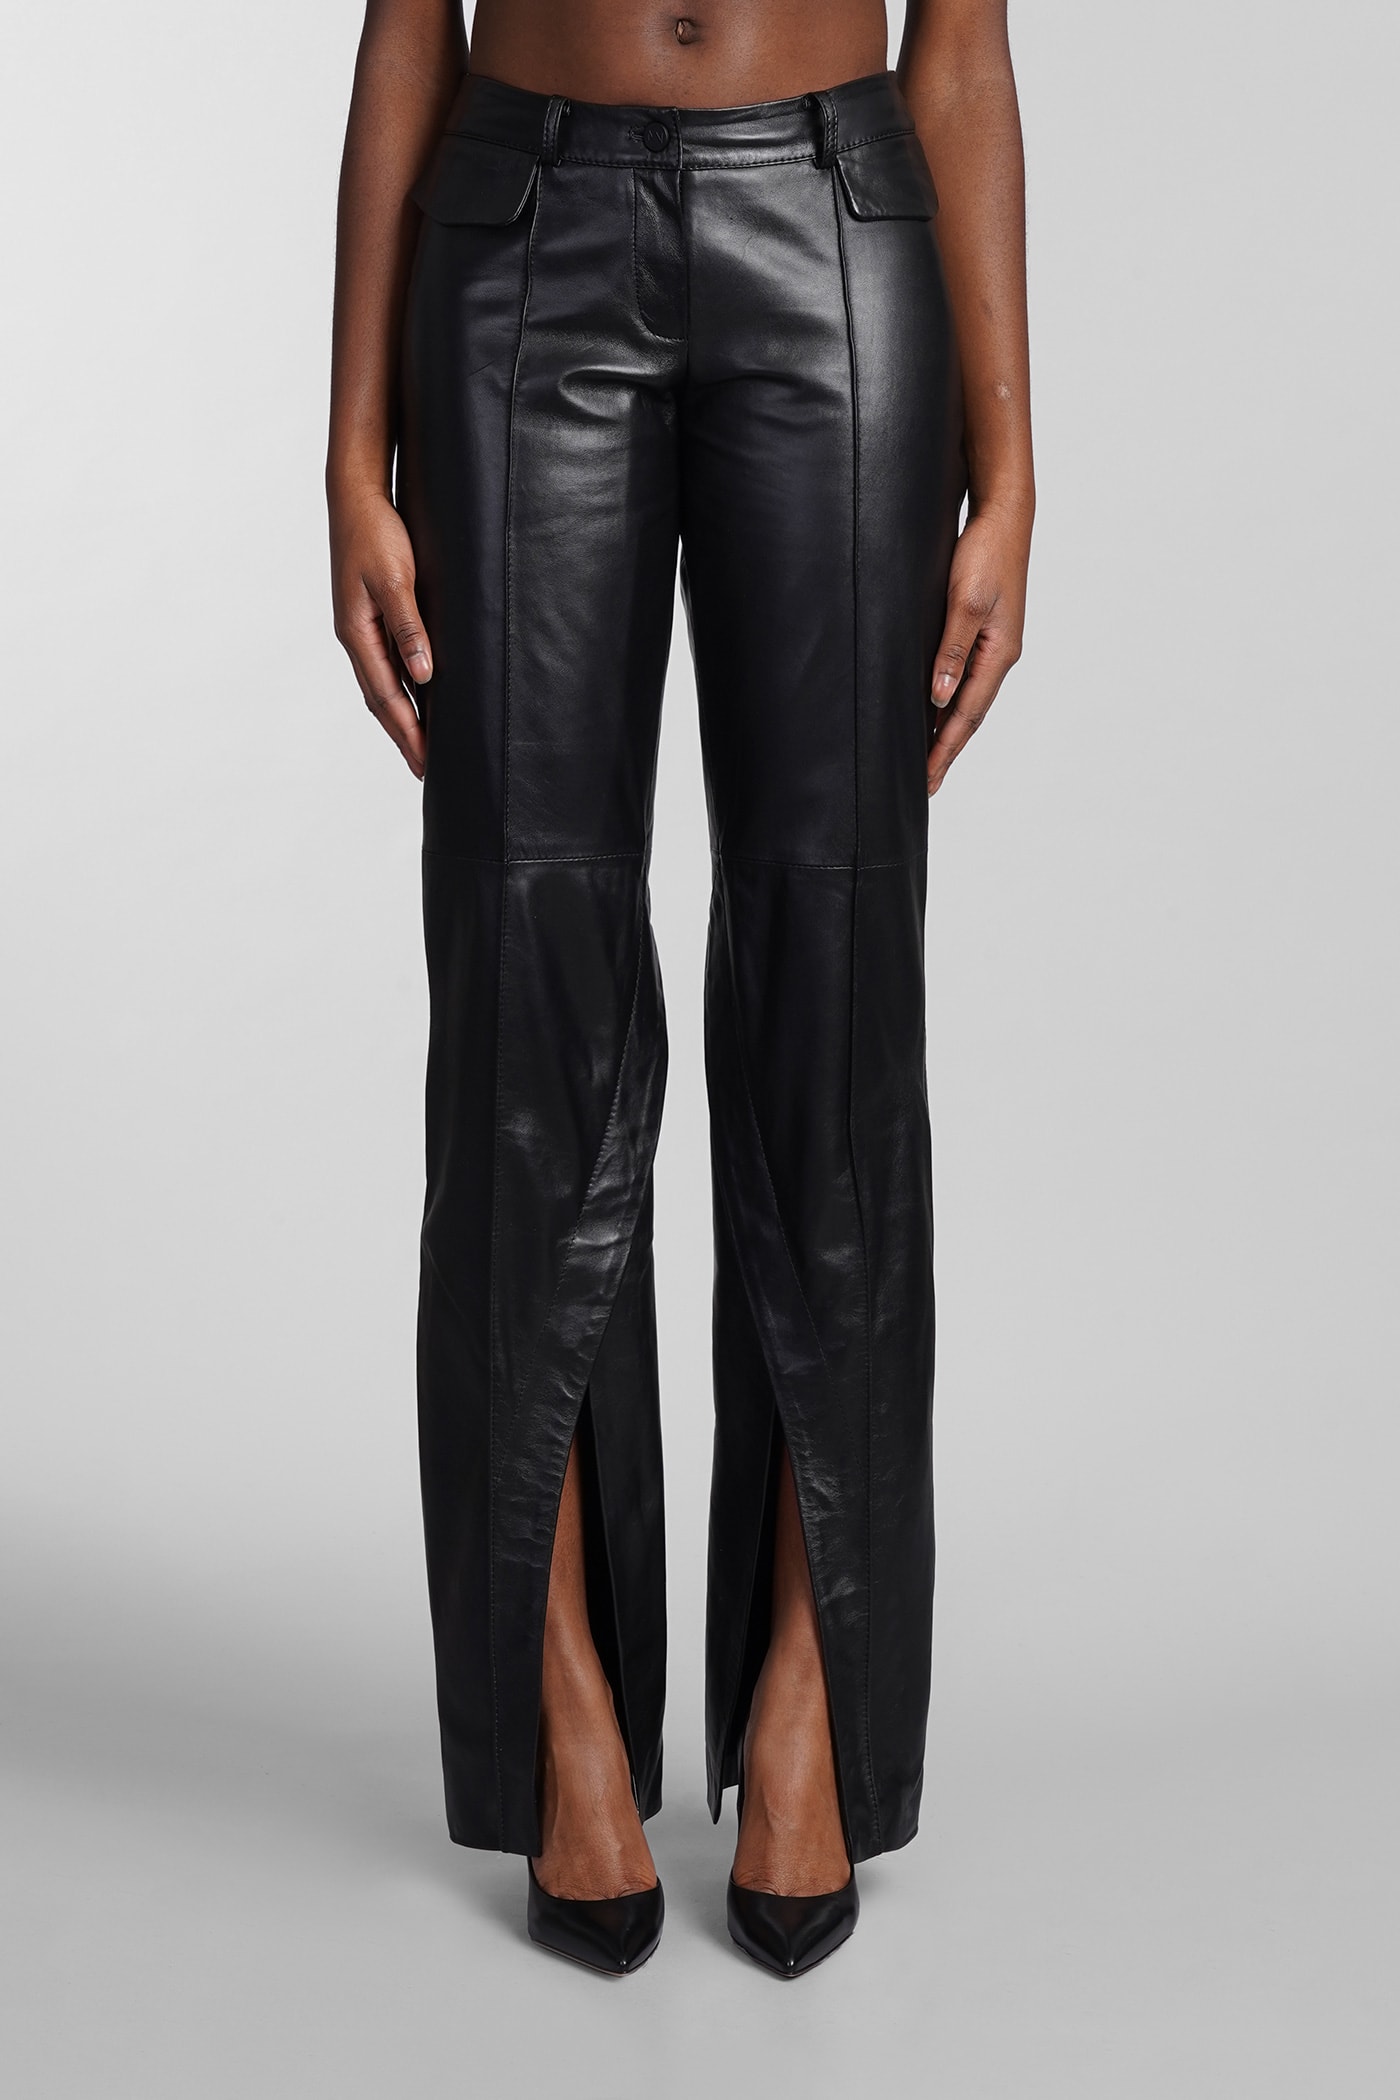 THE MANNEI VENTURA PANTS IN BLACK LEATHER